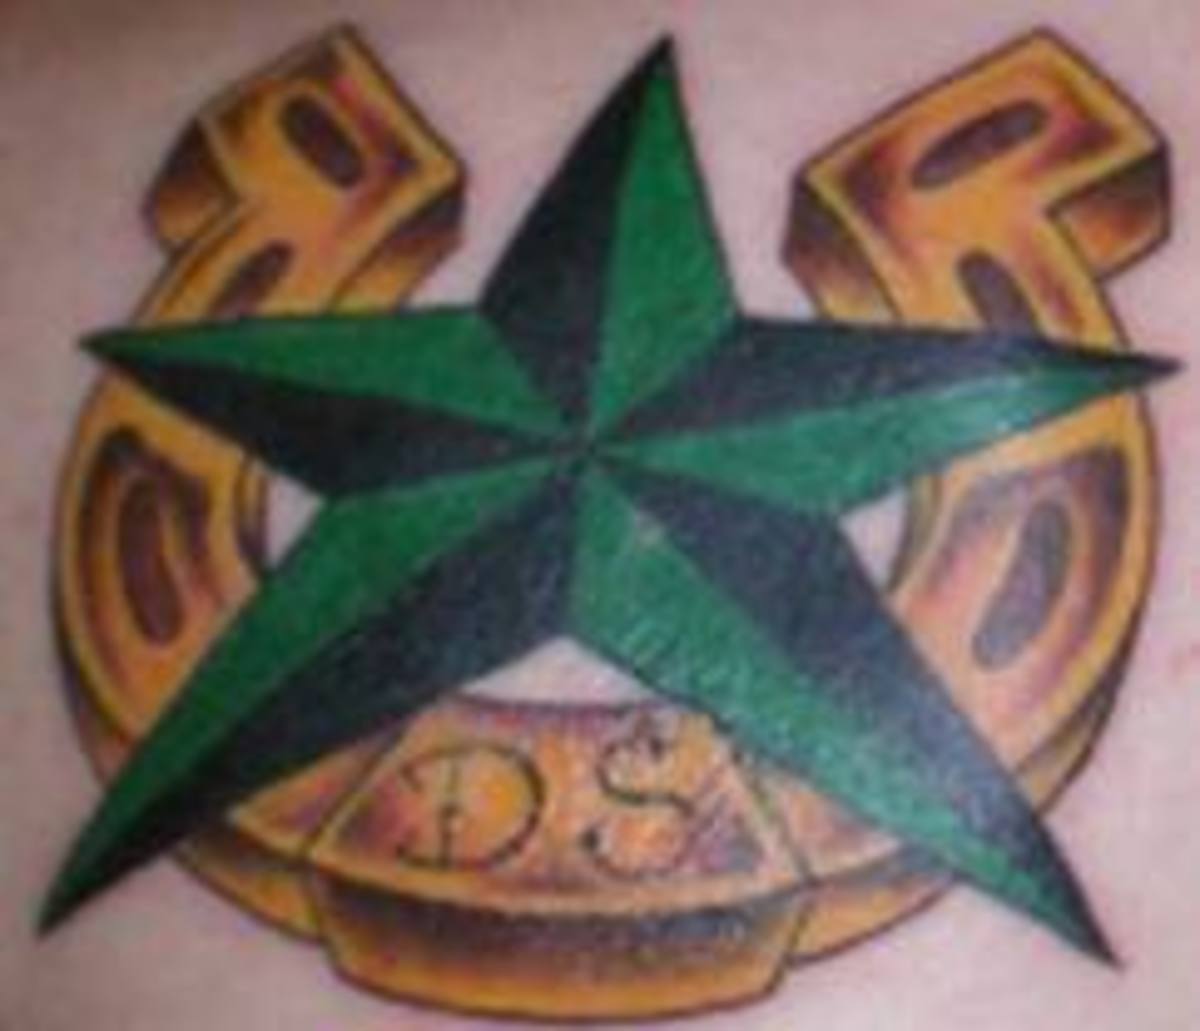 Lucky Tattoo Designs, Lucky Tattoo Symbols, And Ideas - HubPages